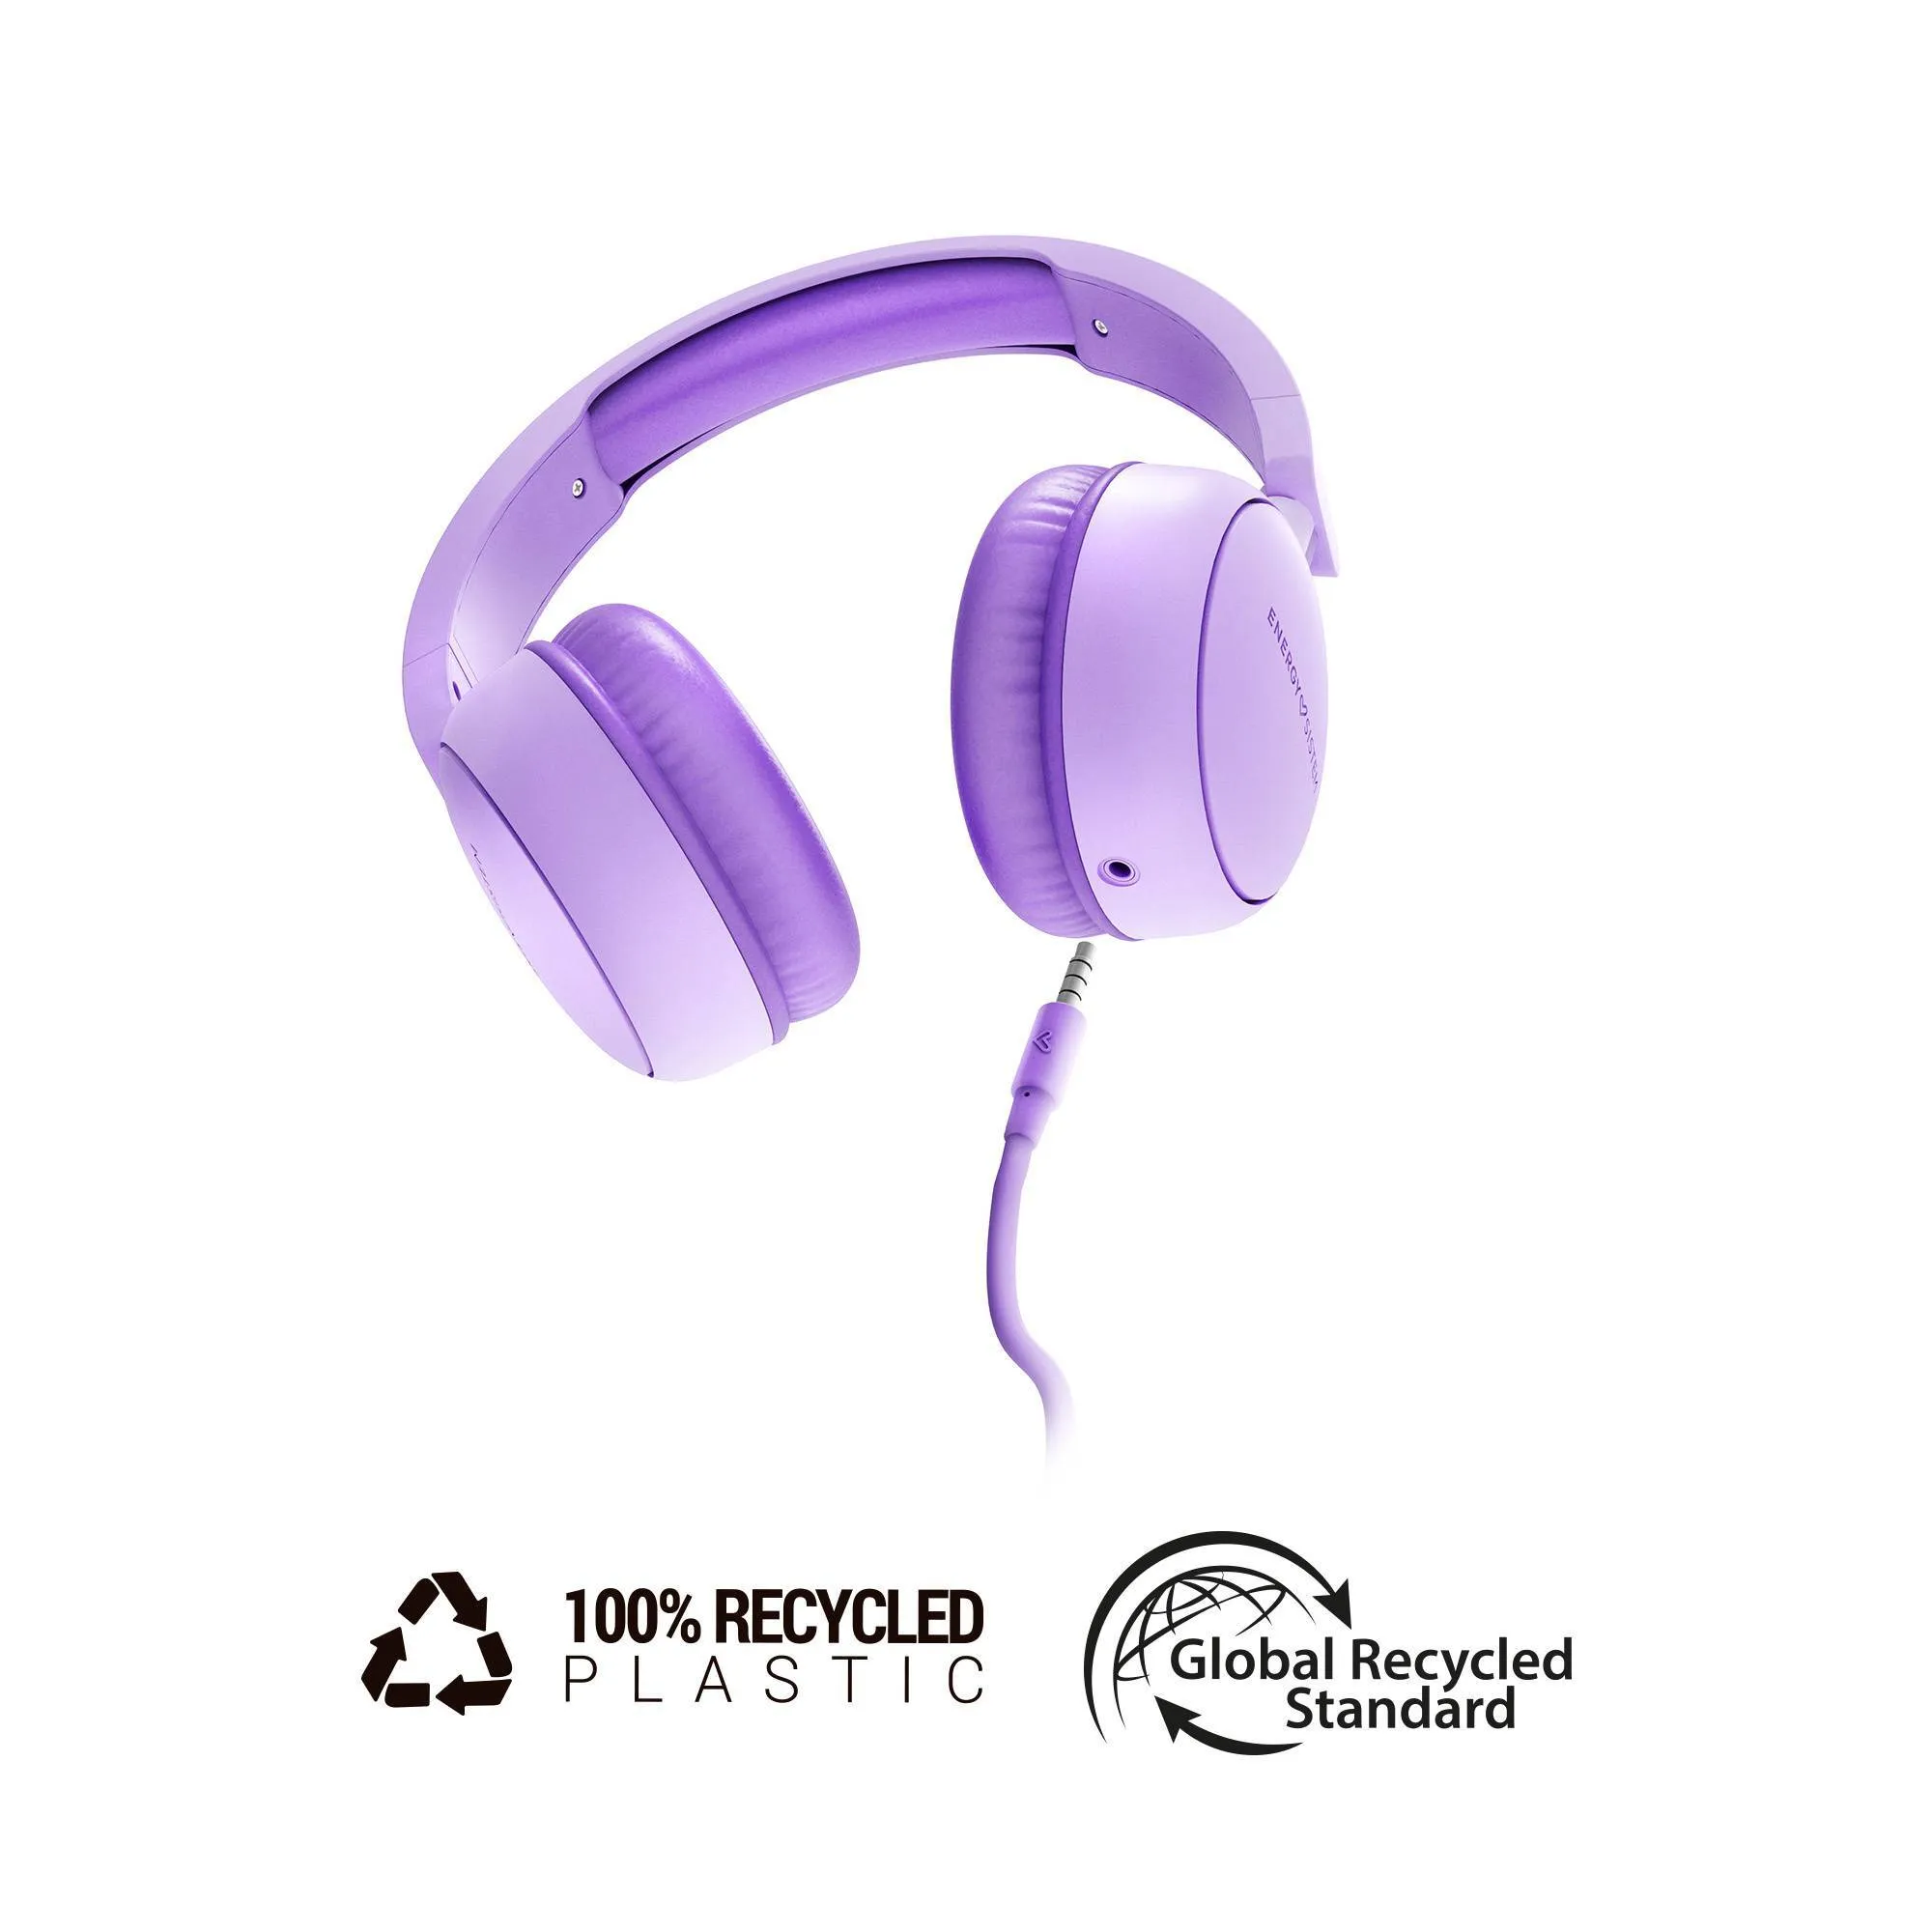 UrbanTune wired headphones, made entirely from recycled plastic